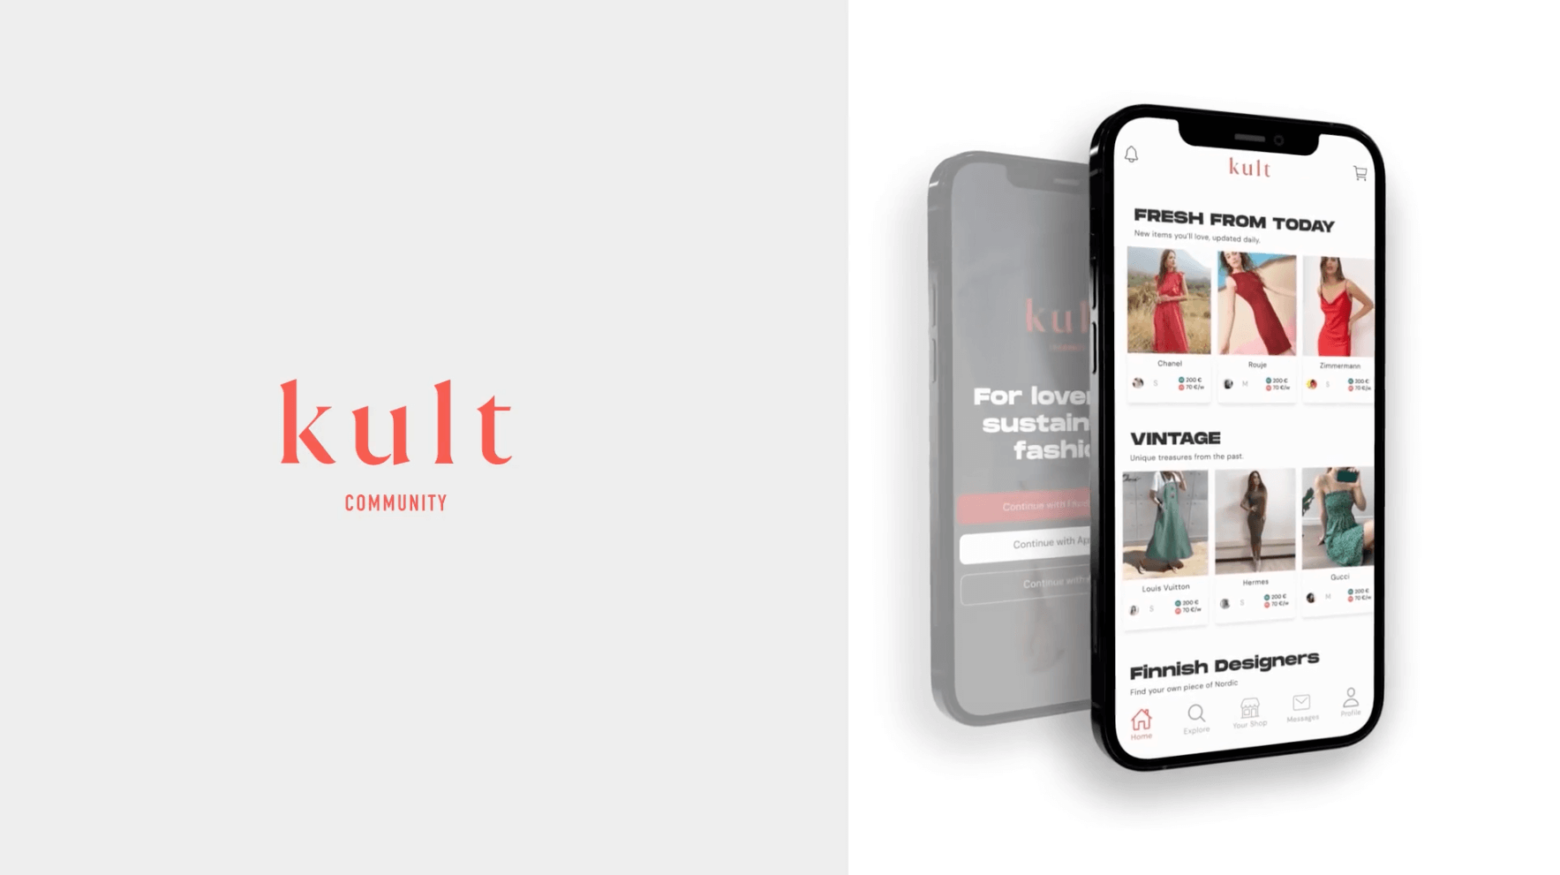 Screenshots of different pages of the Kult Community mobile application.